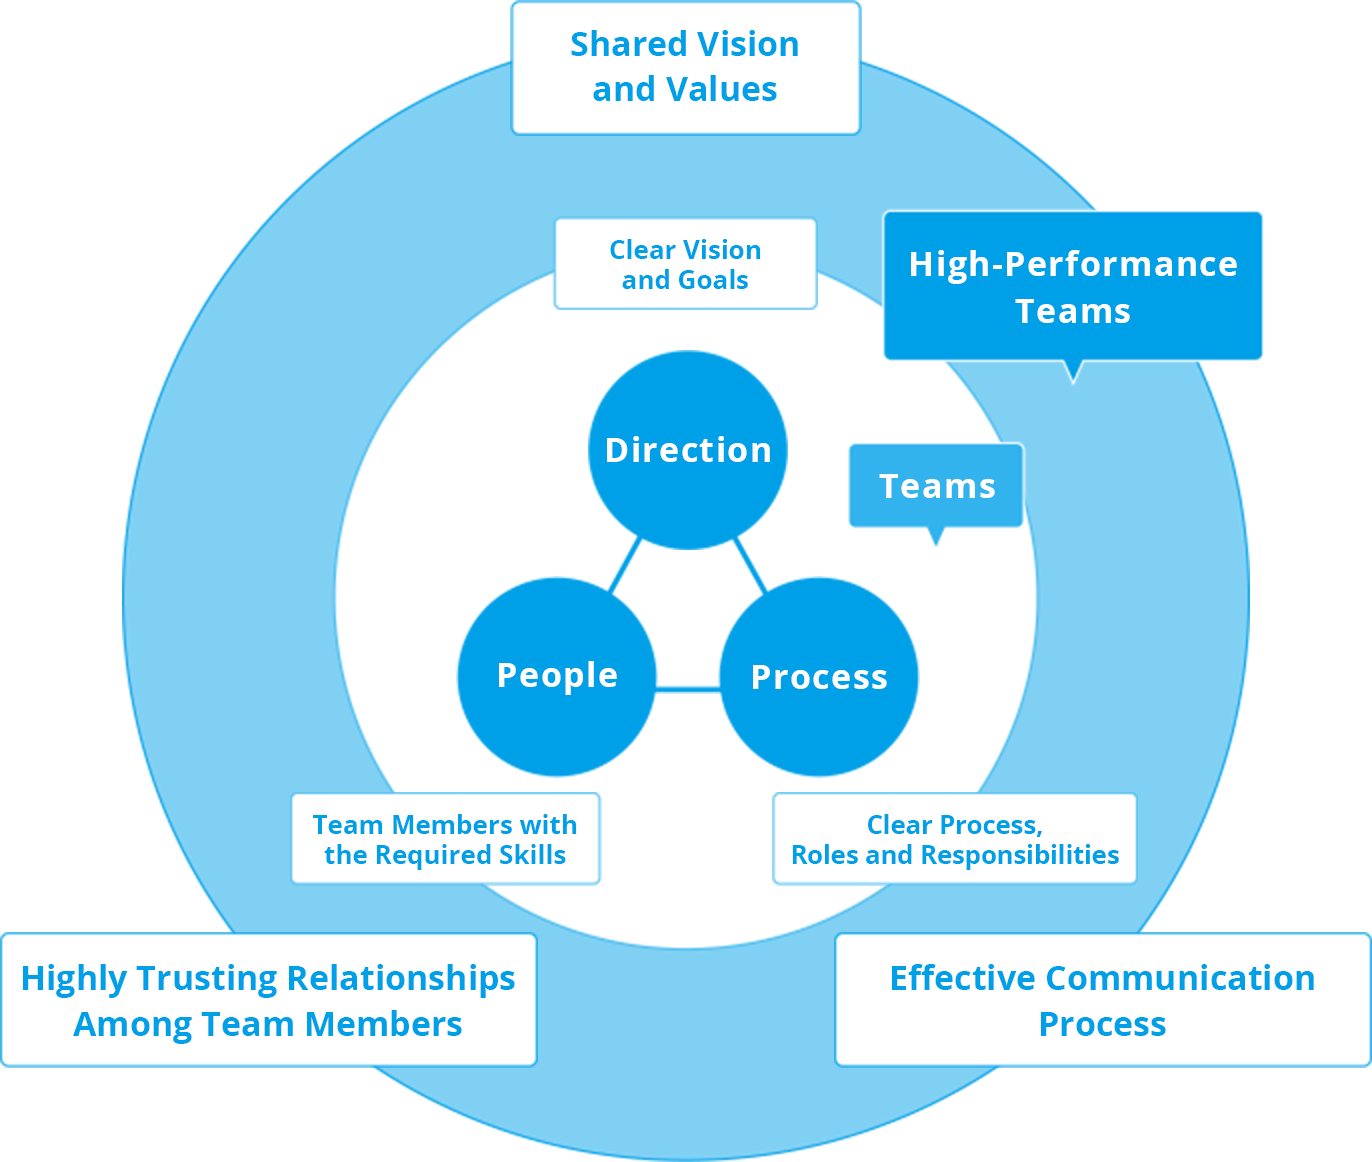 Elements of High-Performance Teams